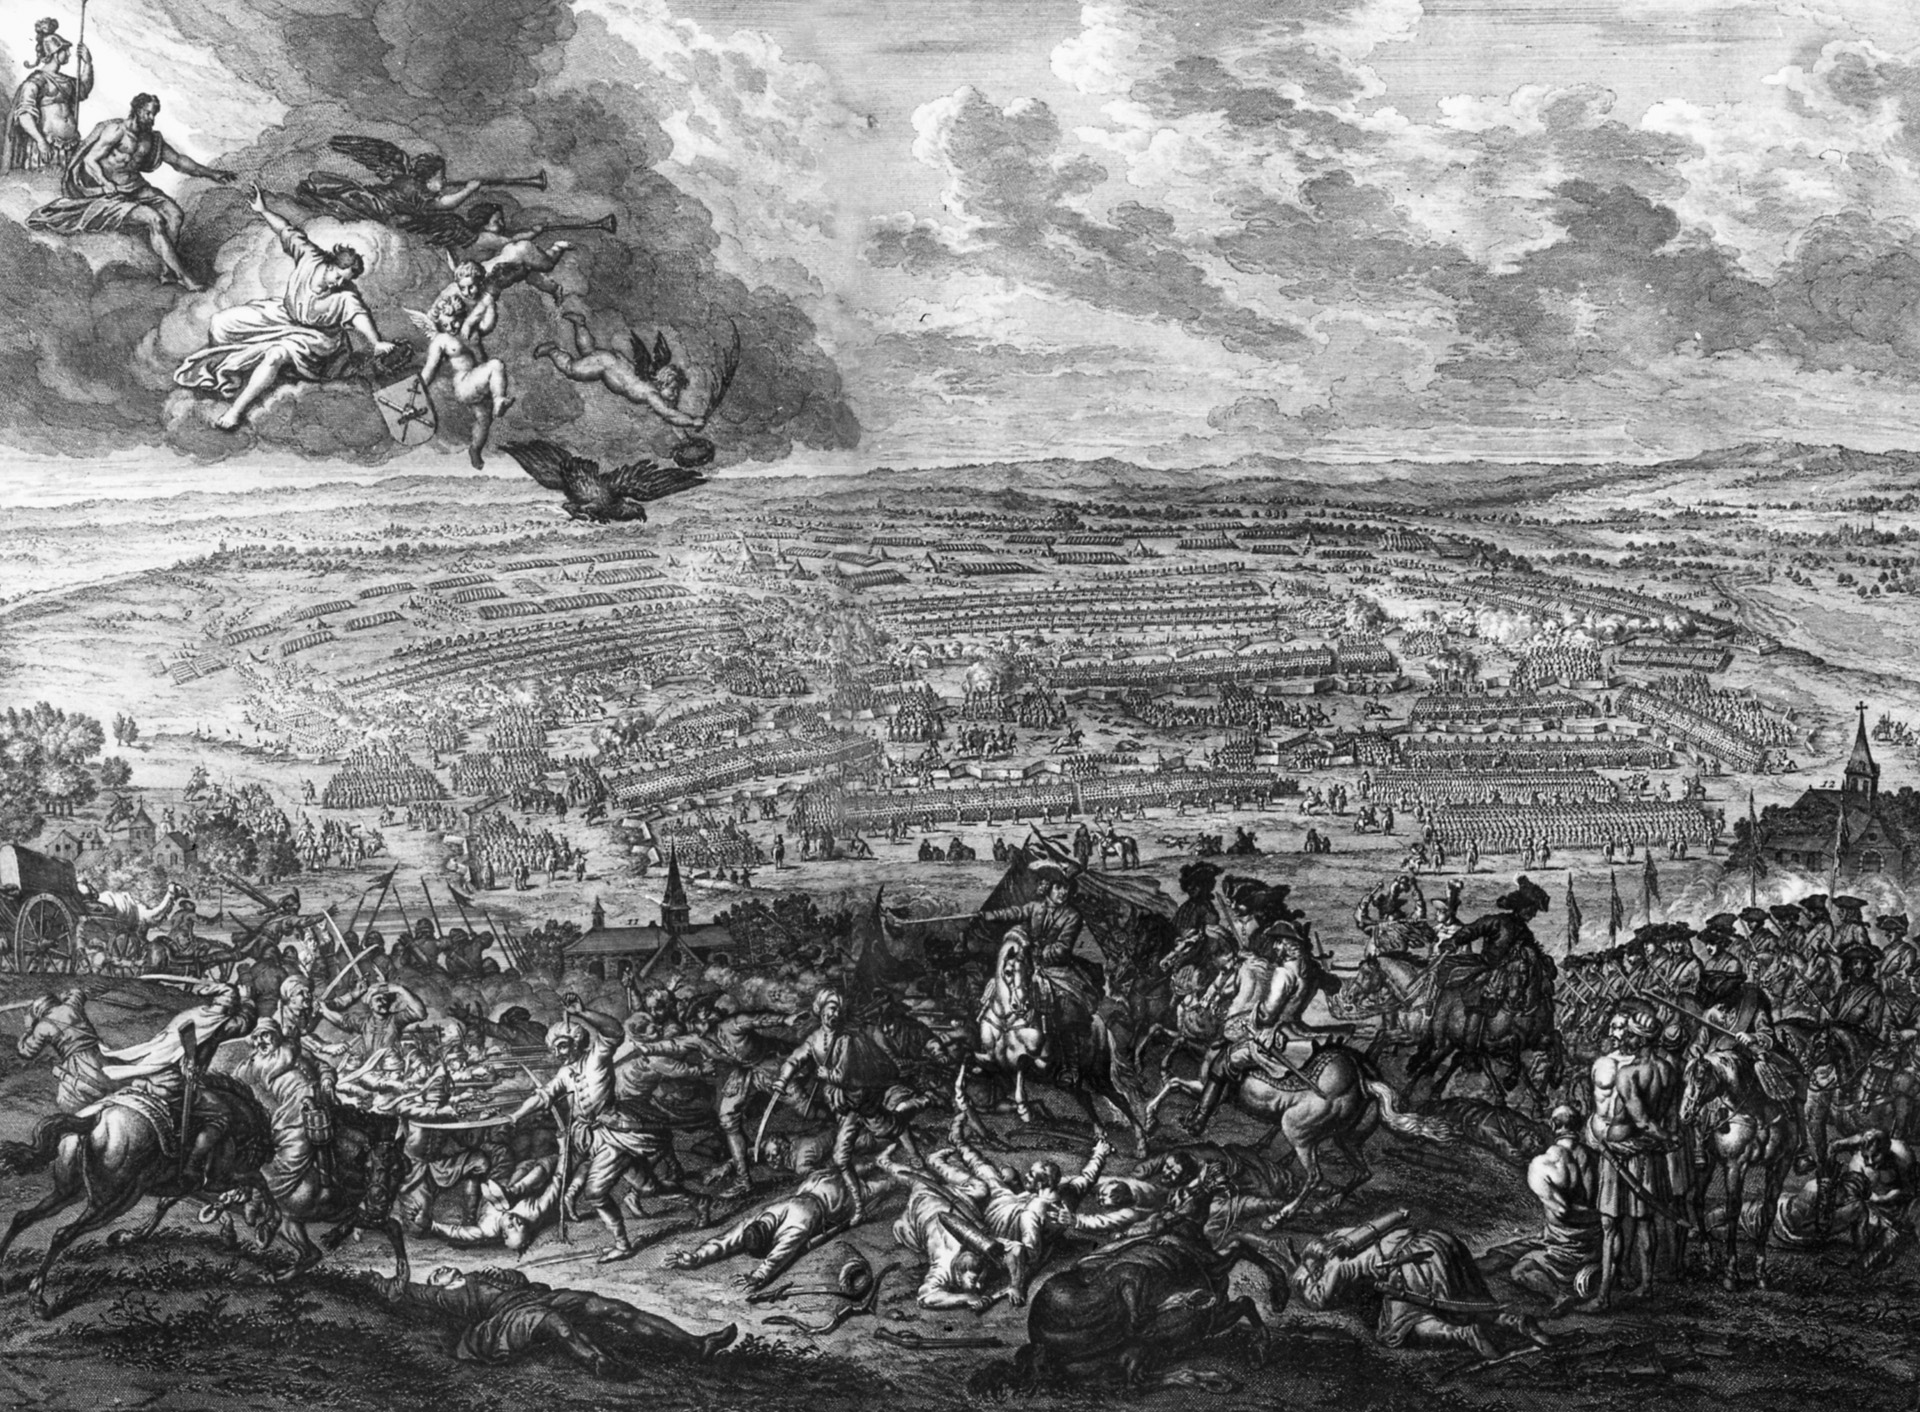 Fierce fighting rages on Earth while the war gods watch from on high in this symbolic 18th century work depicting the Battle of Peterwardein.